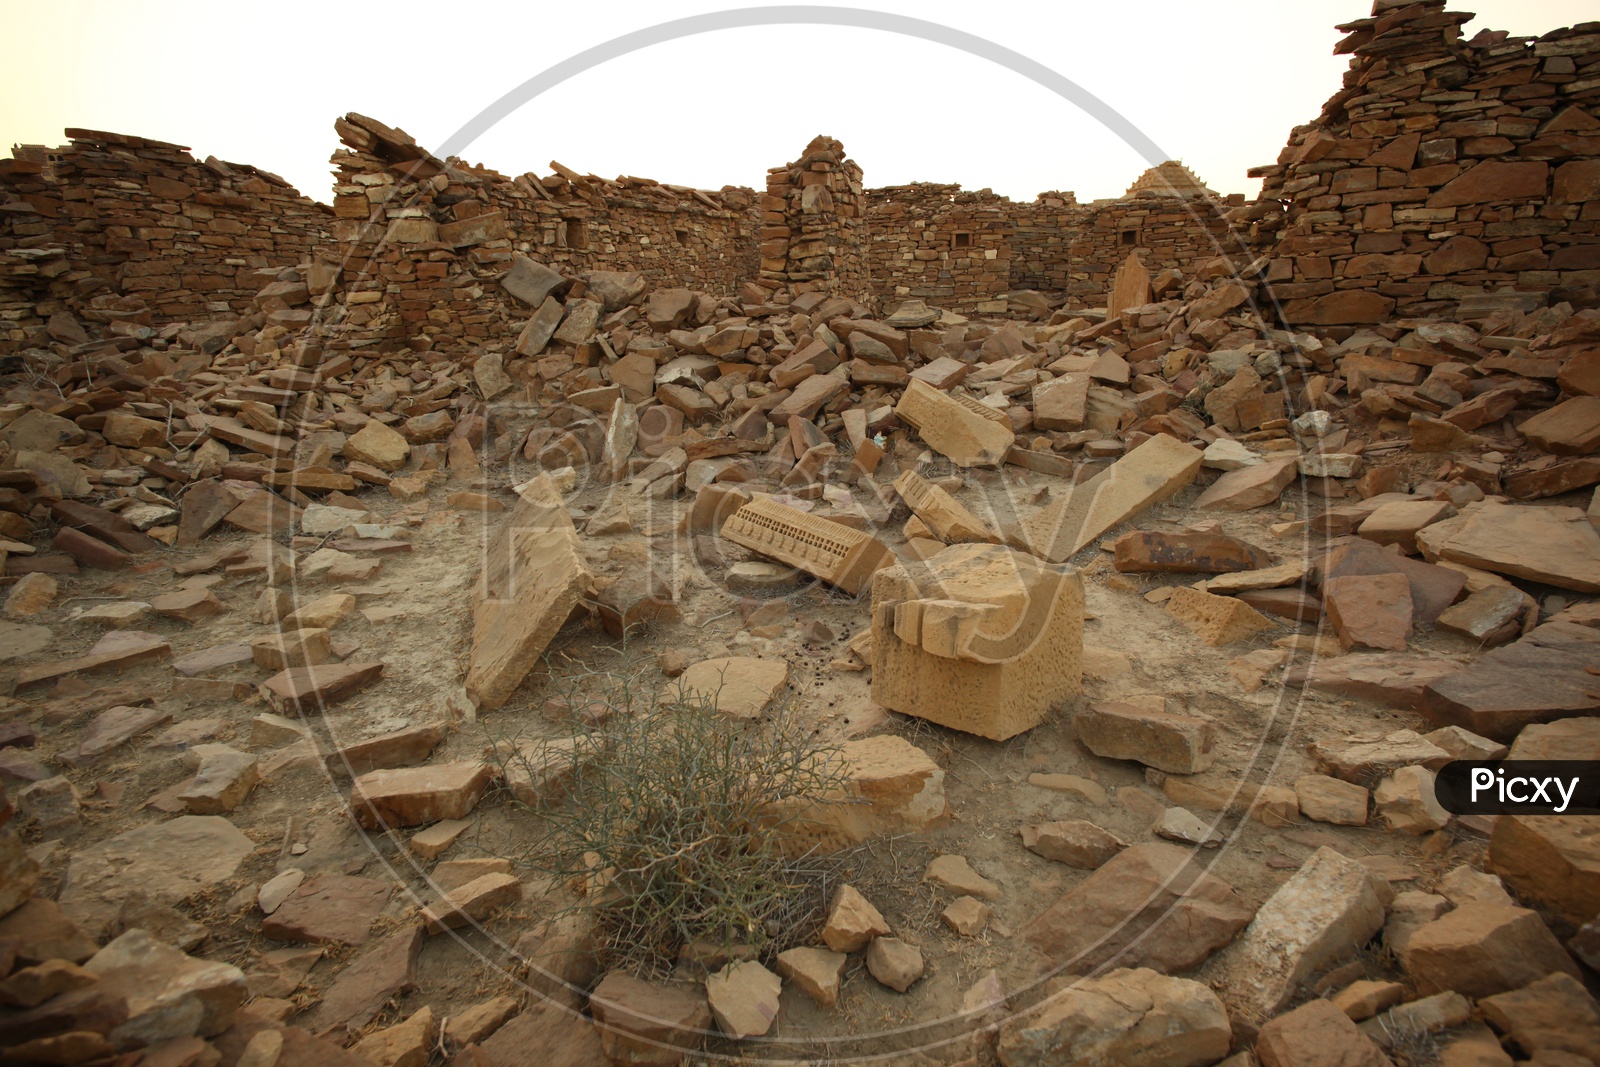 Old ruins in a desert